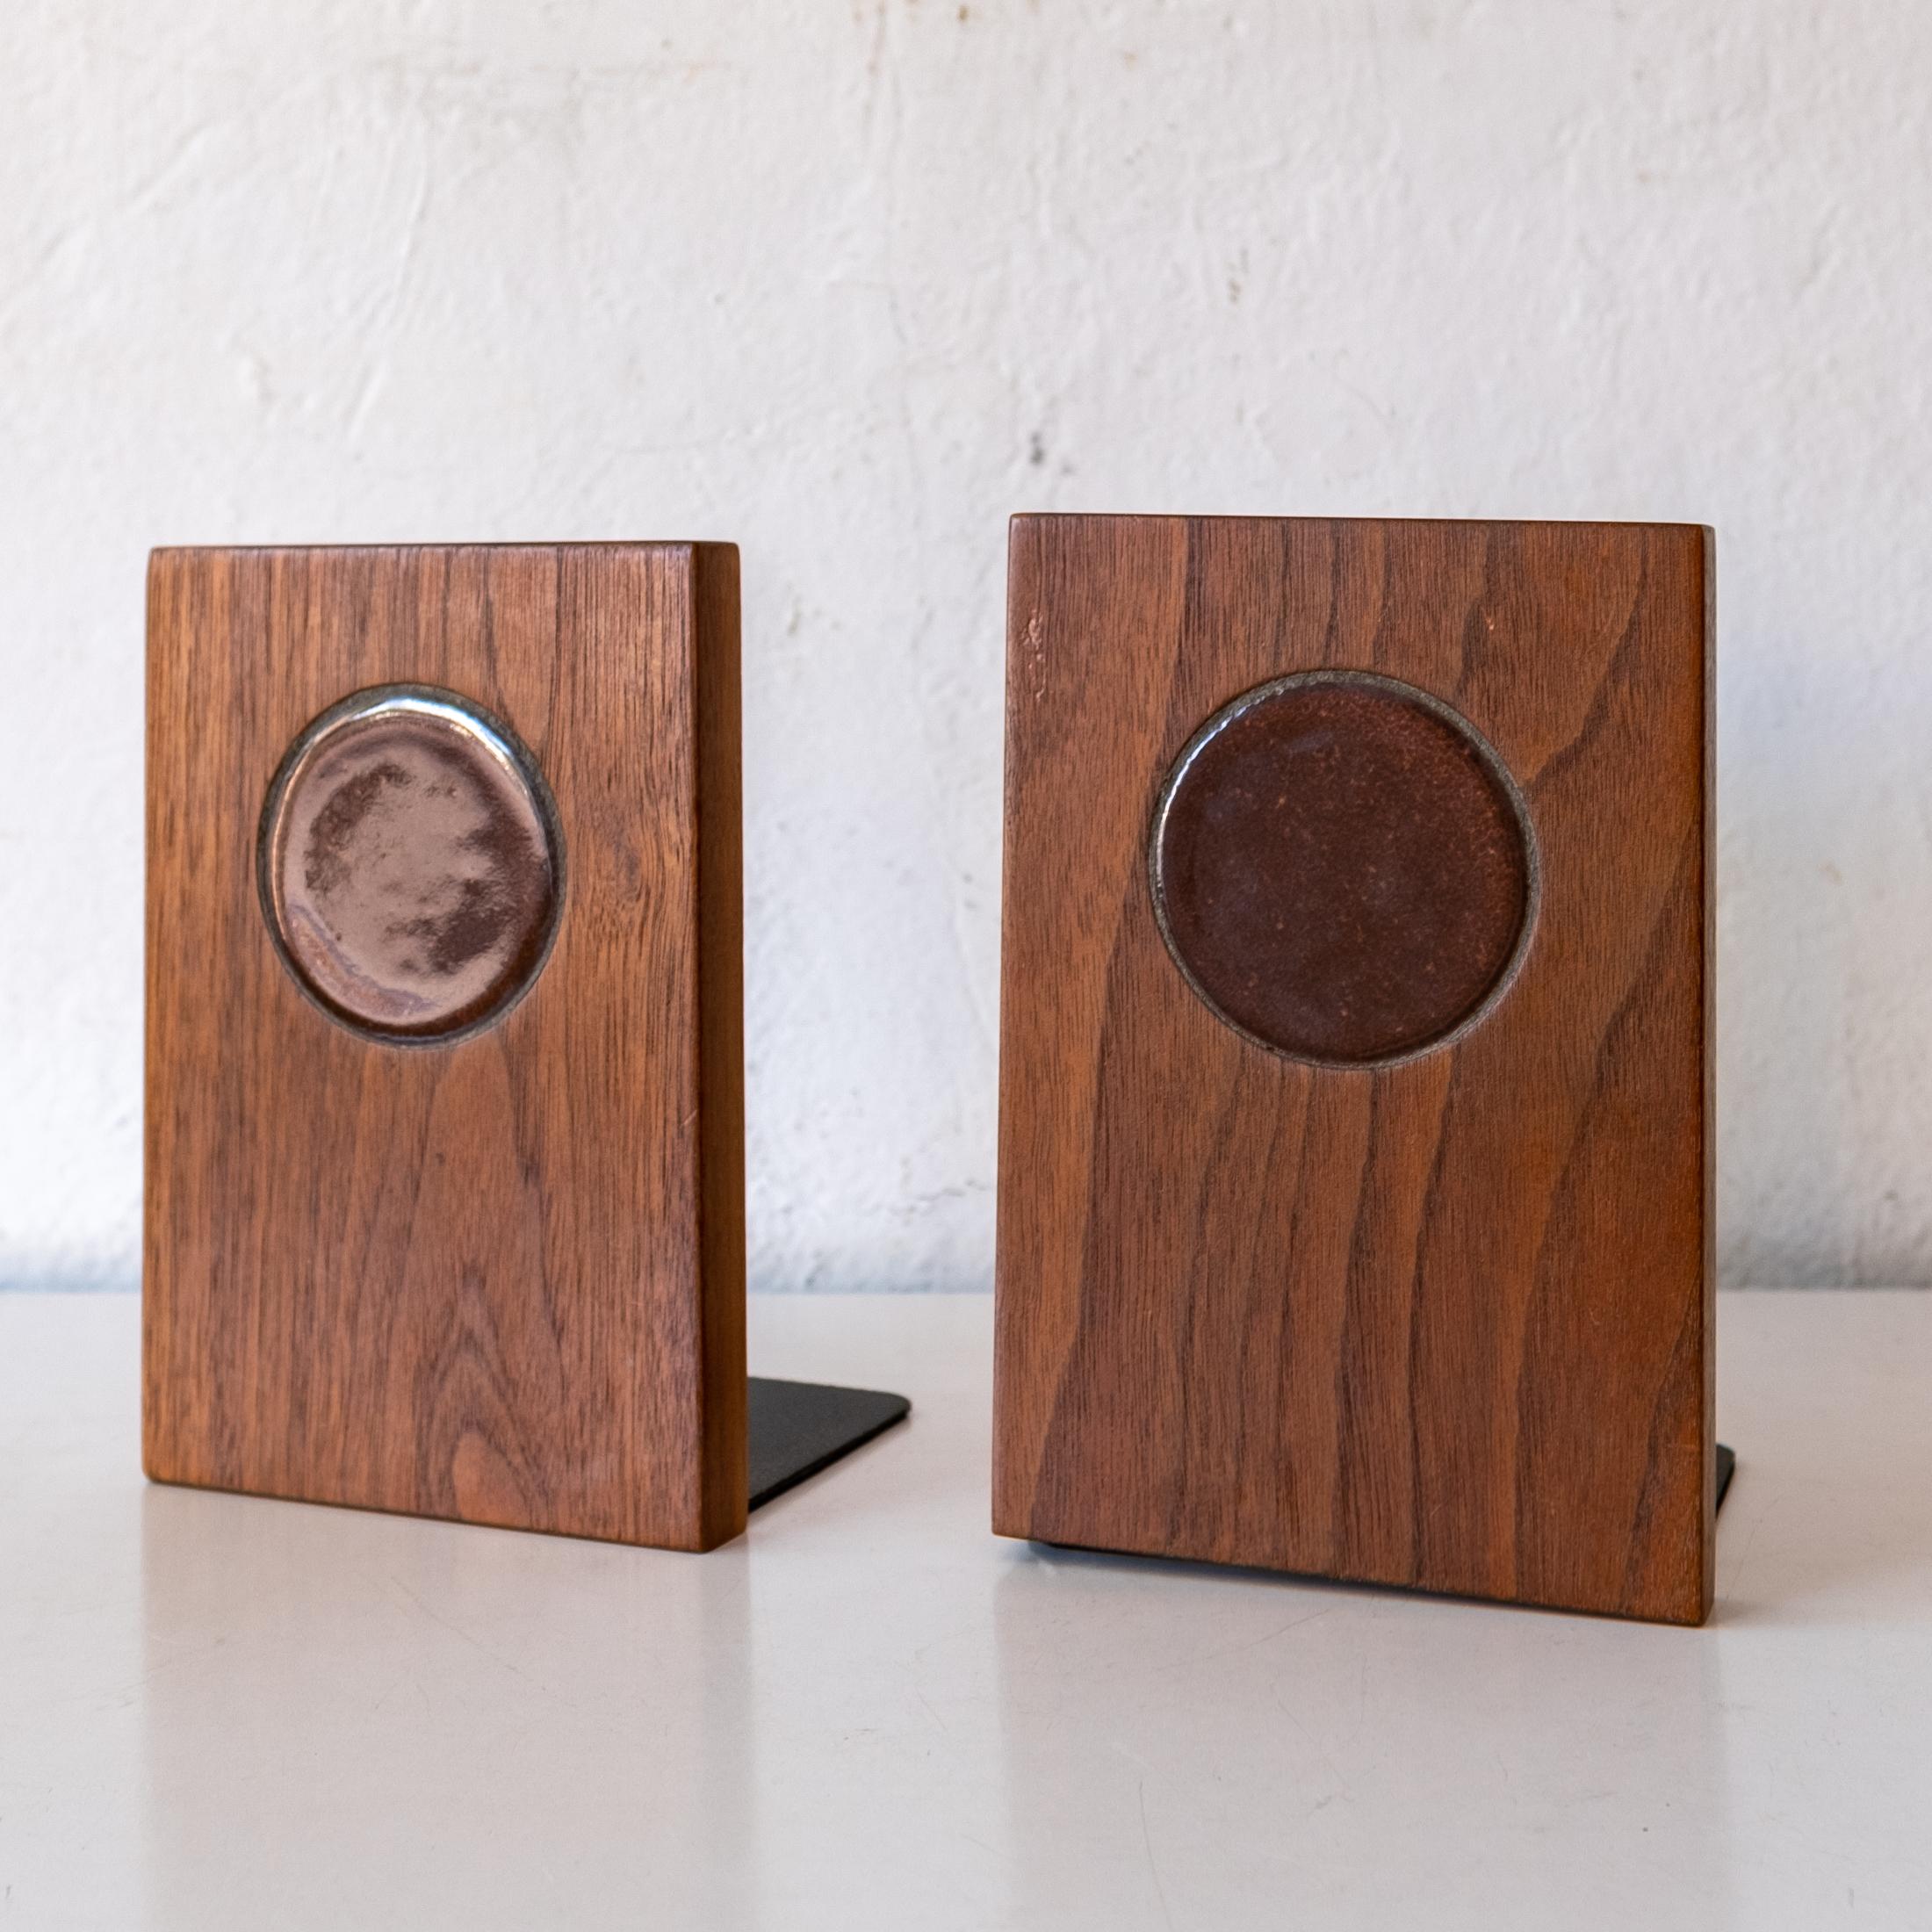 American Midcentury Walnut and Ceramic Tile and Bookends